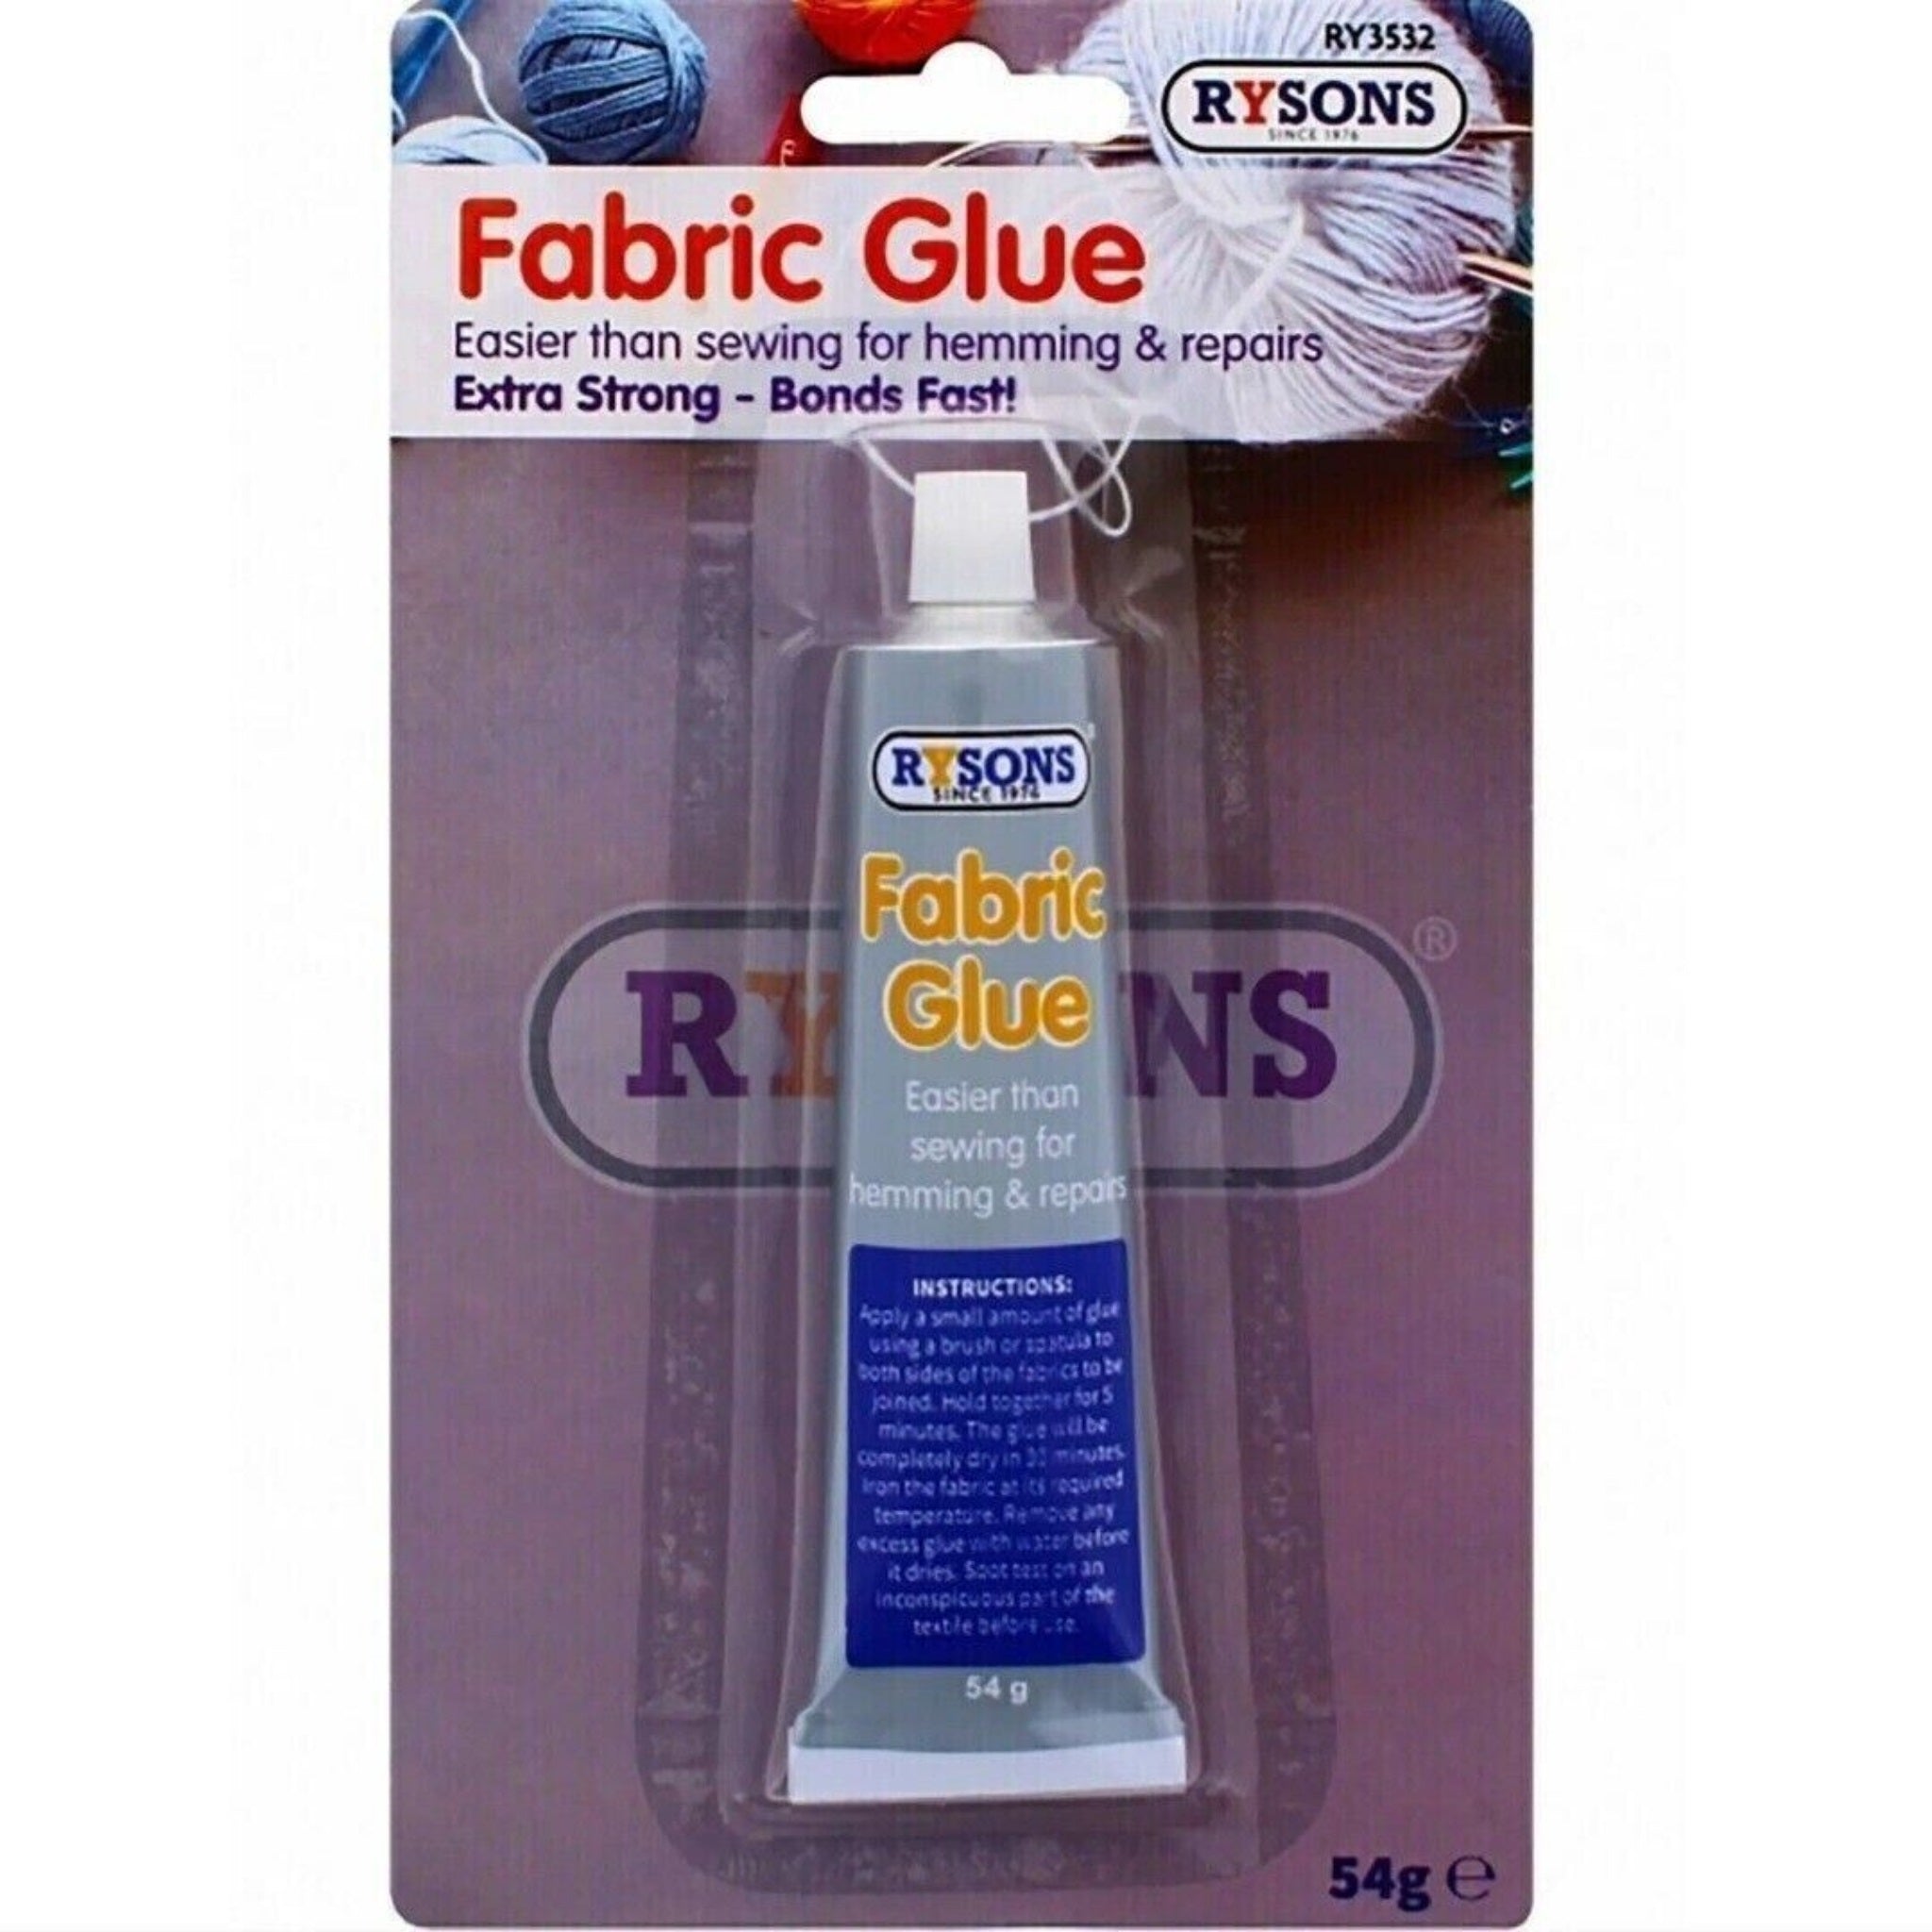 Beclen Harp Extra Strong Fabric Glue 54g Quick Bond Adhesive for Hemming Sewing No Stitch